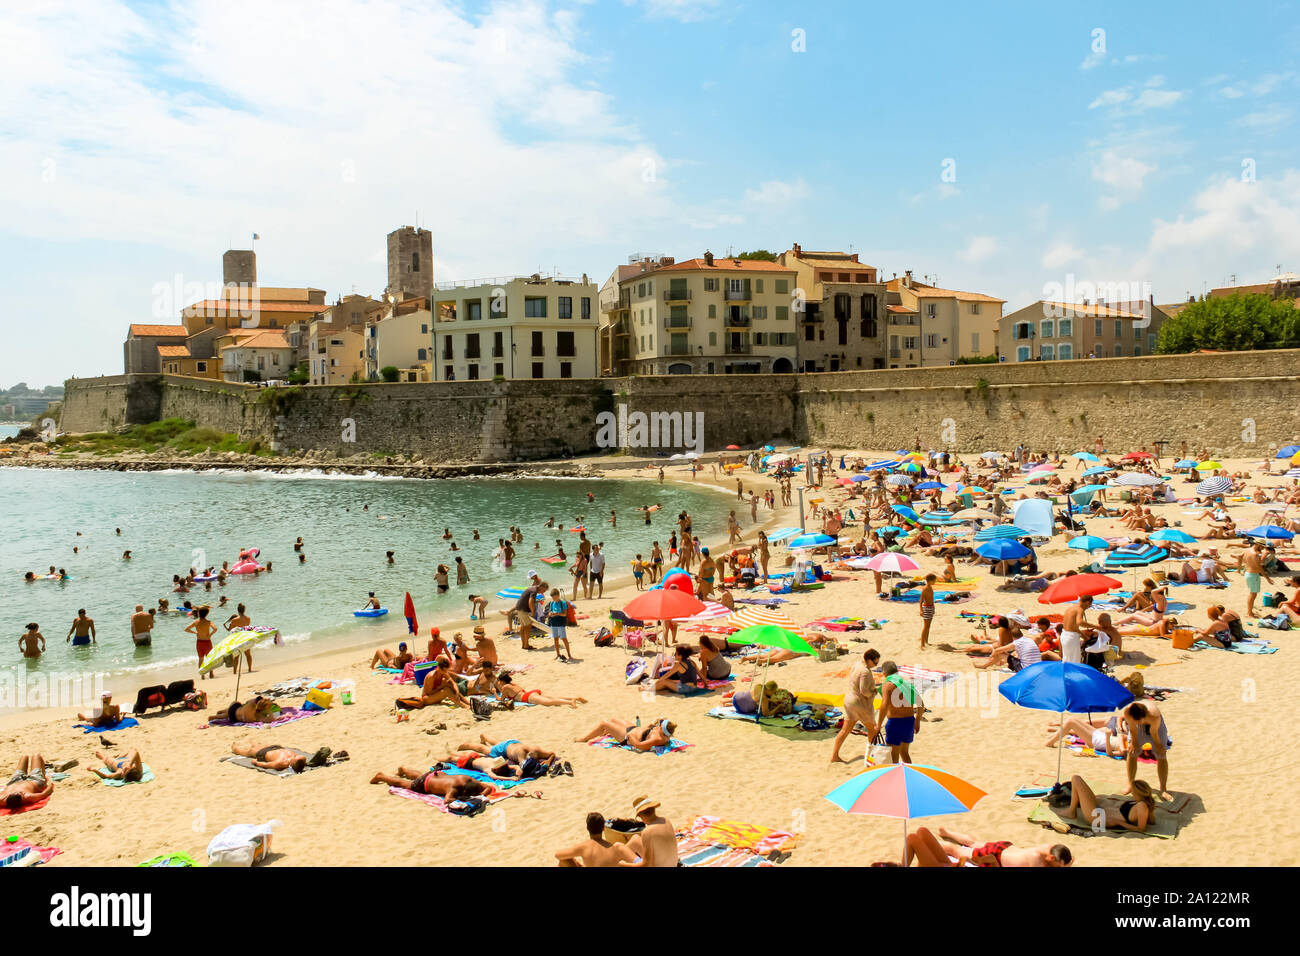 ANTIBES, FRANCE - AUGUST 07, 2019: Sandy beach with people and umbrellas and the Fort carré Chateau Grimaldi at Old Town Vieil Antibes Cote d'azur Fre Stock Photo